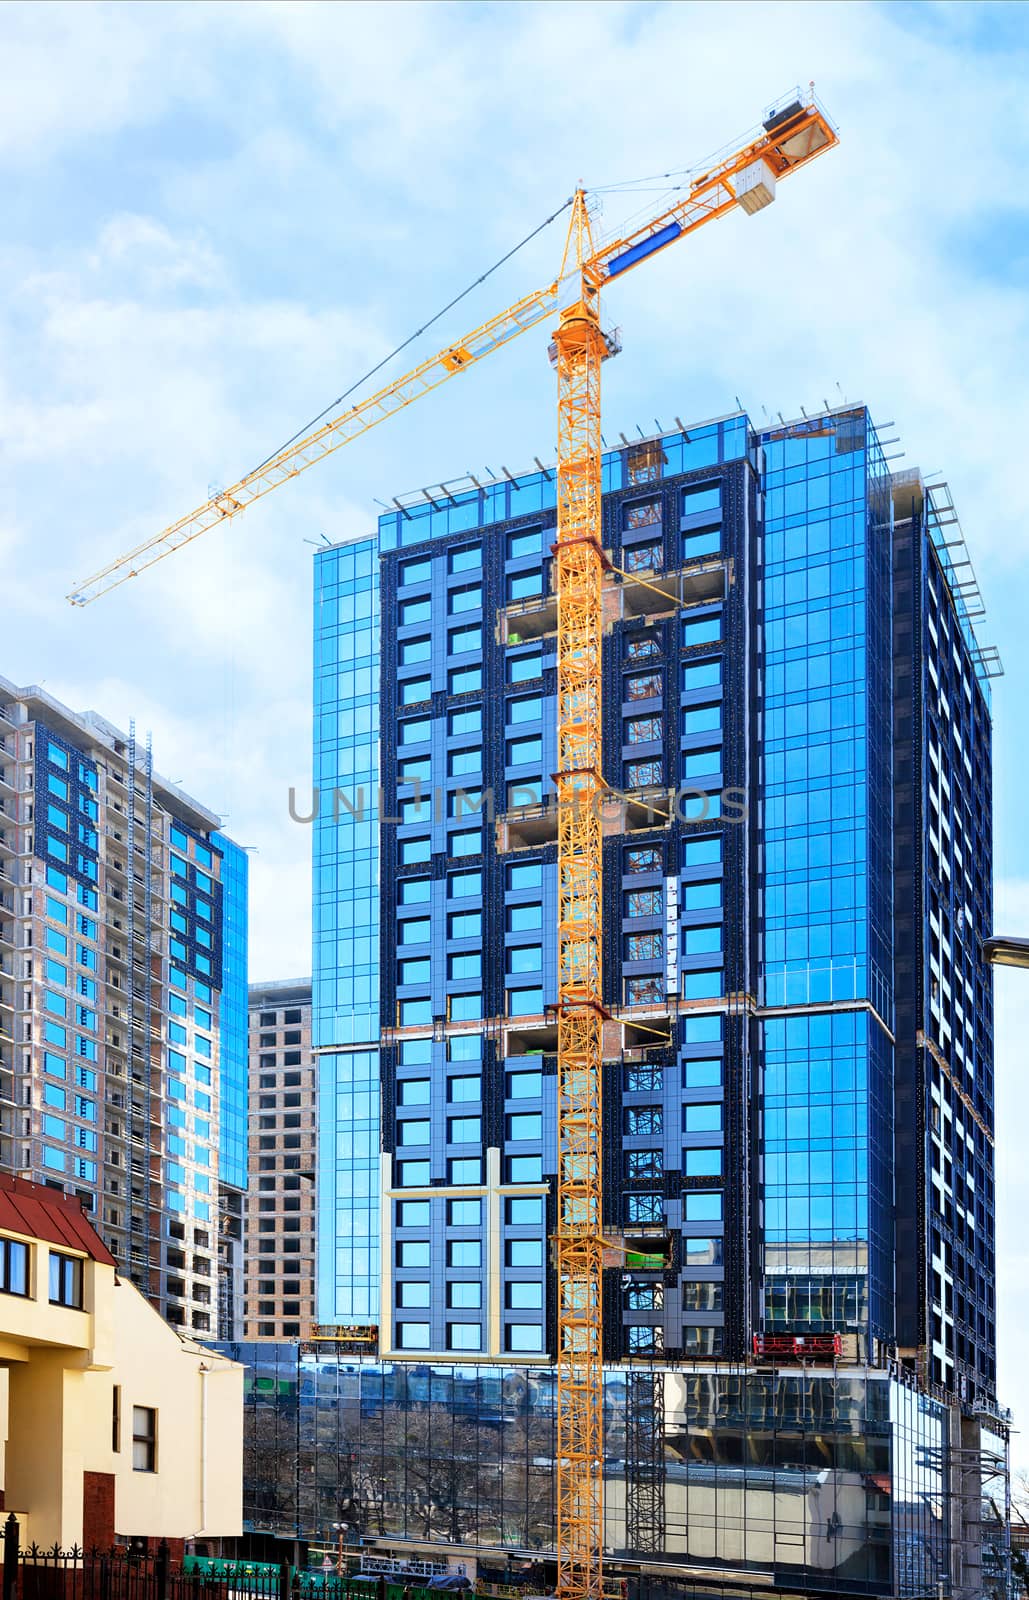 In the construction of modern residential concrete buildings with a glass facade, a tower crane is used, the blue sky is reflected in the windows of the building.